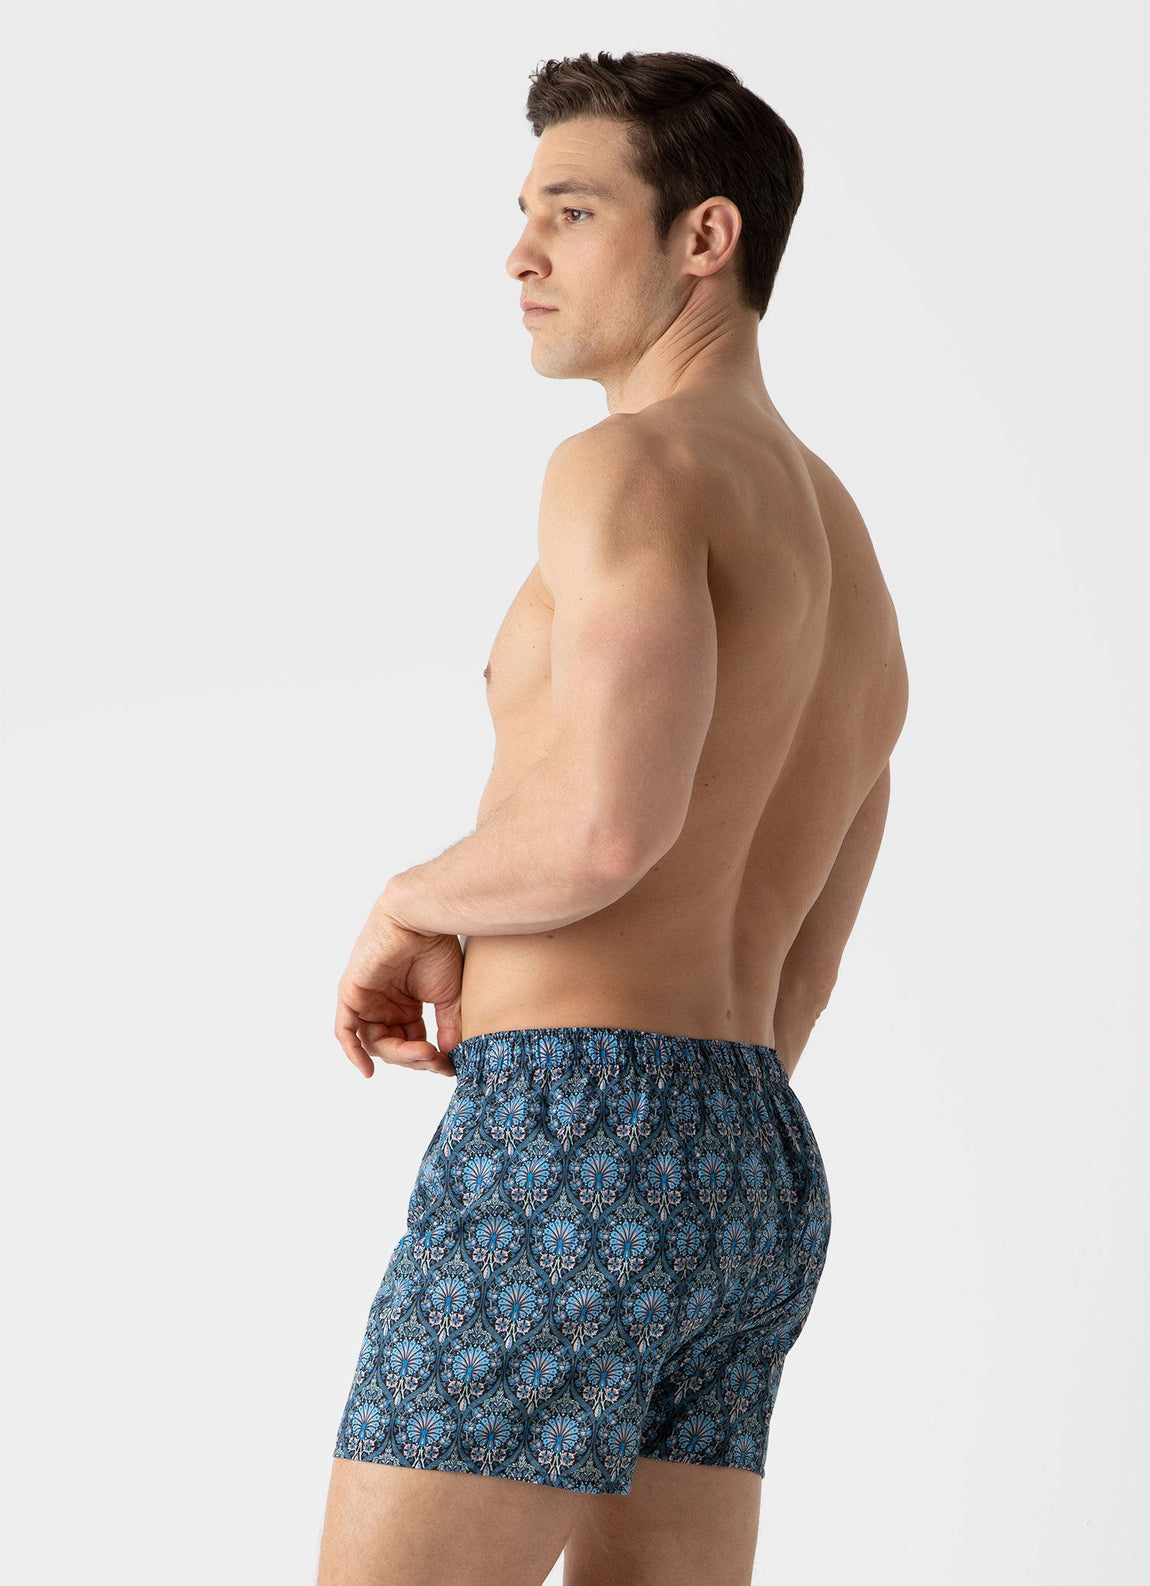 Classic Boxer Shorts in Liberty Fabric